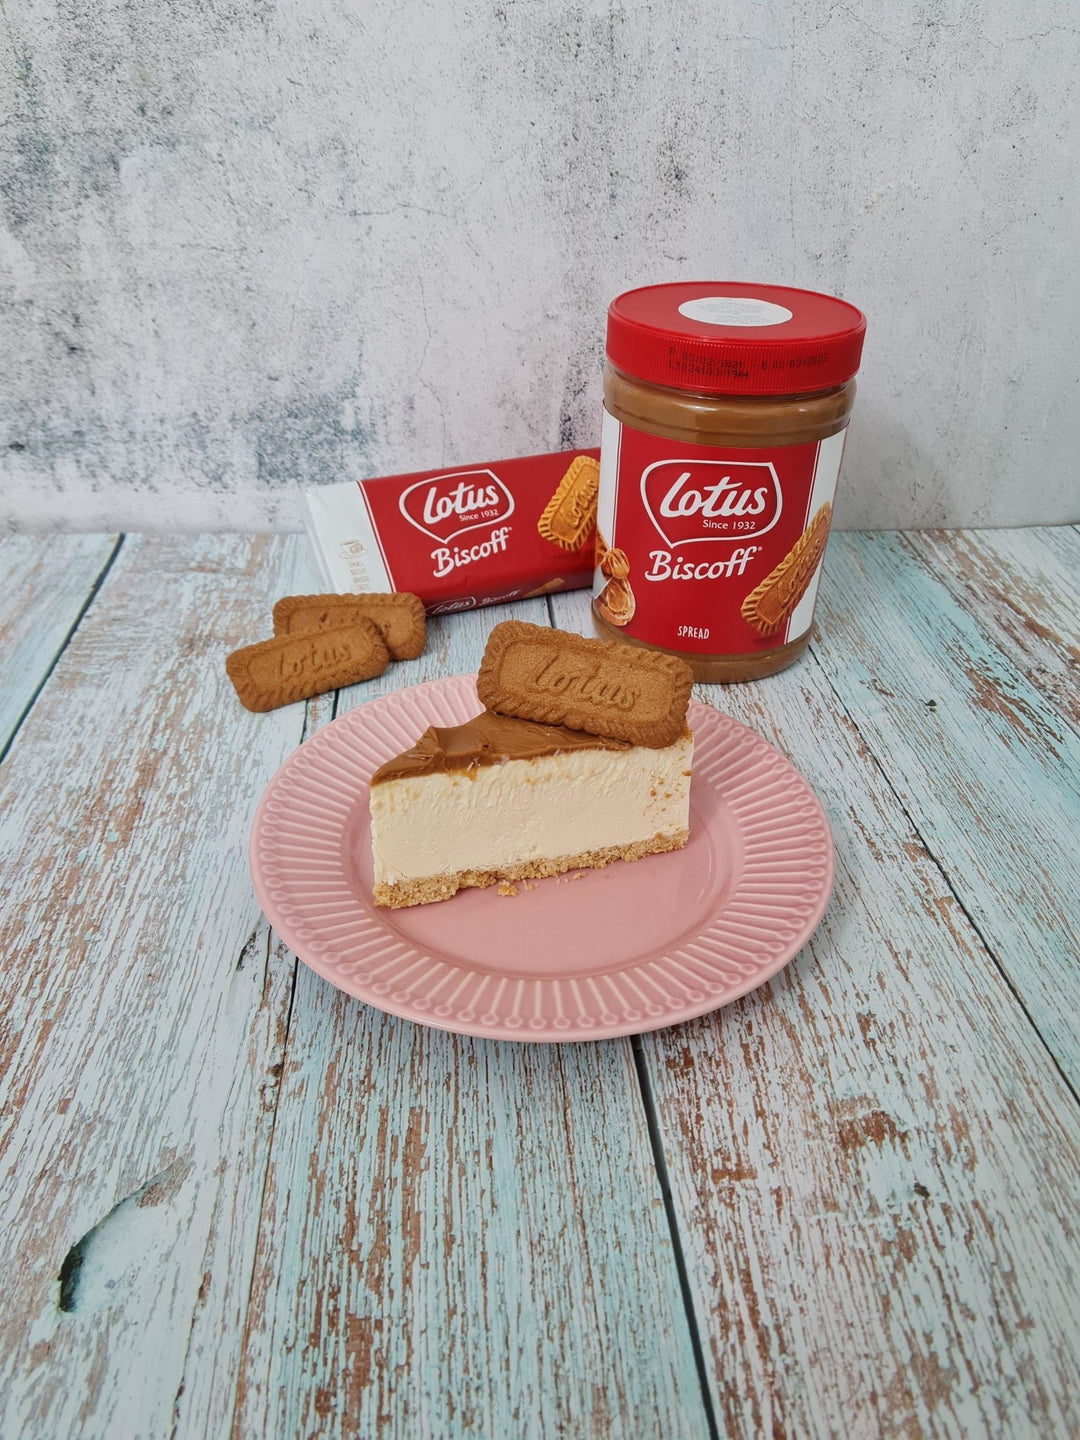 Eggless Lotus Biscoff Cheese 1pc SLICE CAKE (Available Daily) - SK Homemade Cakes---